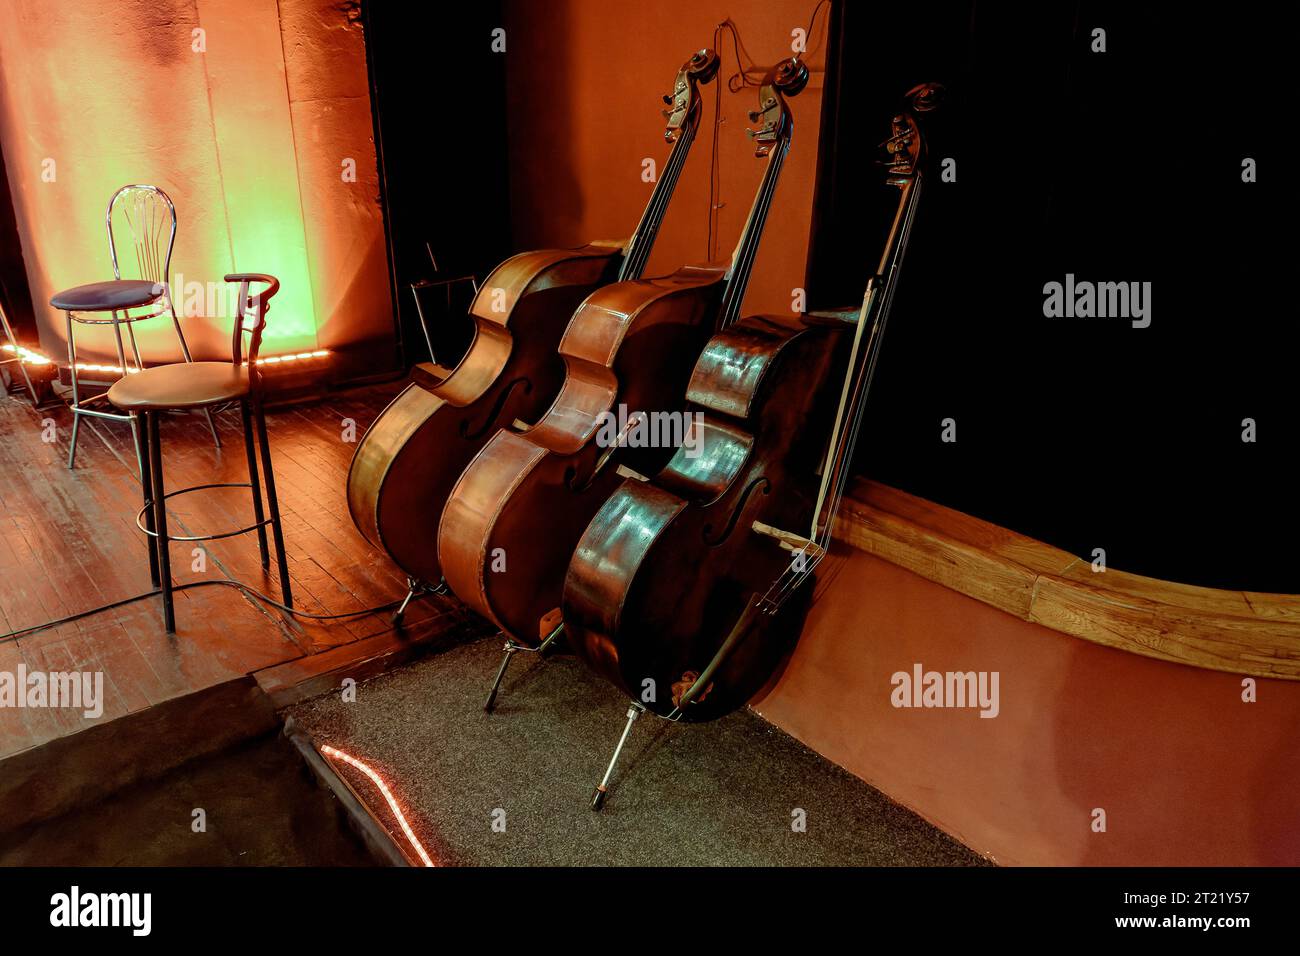 Image of three wooden stringed instrument of a symphony orchestra double bass Stock Photo